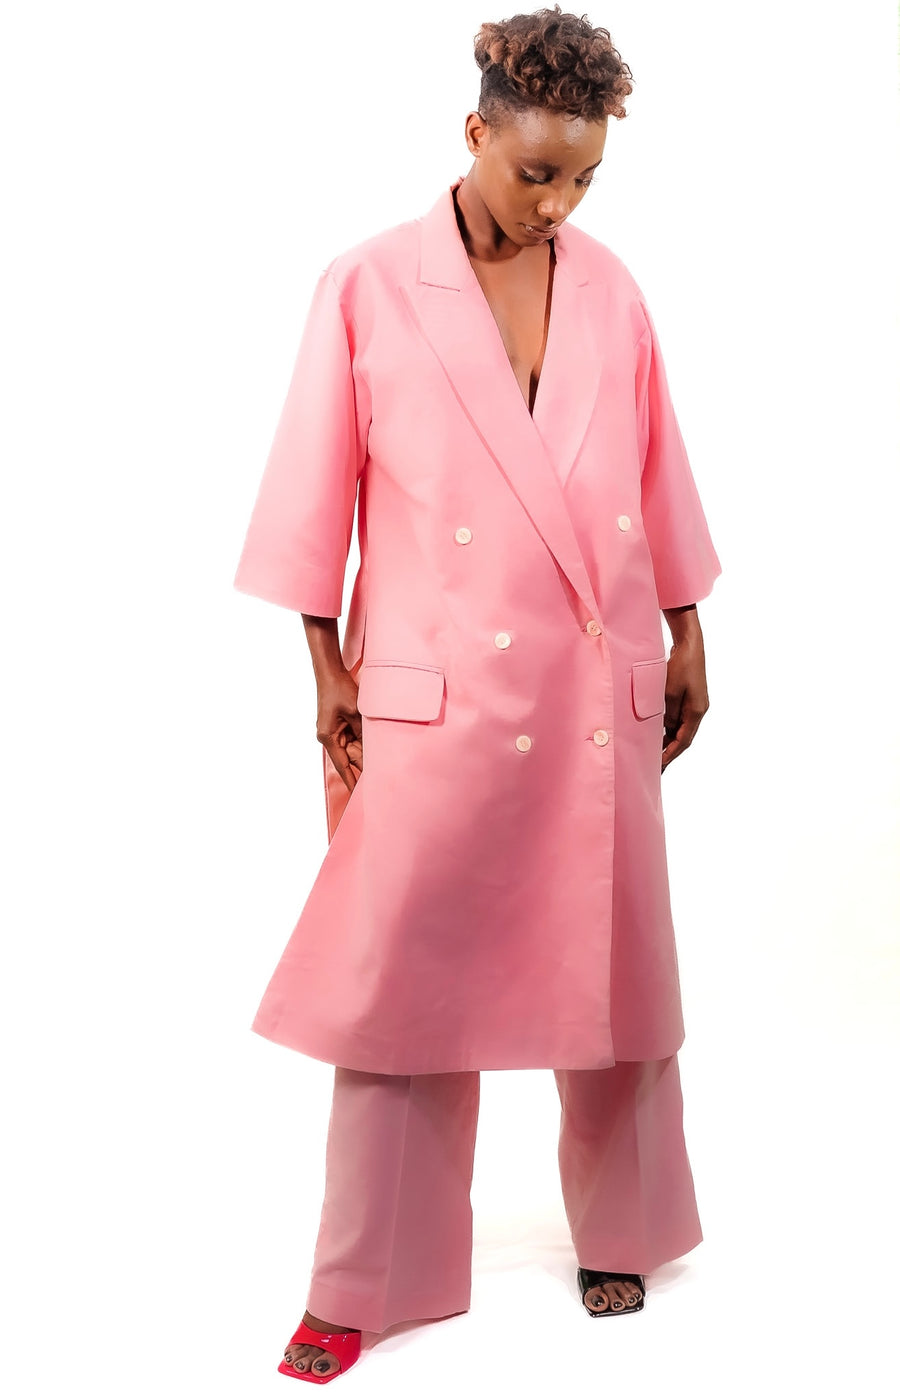 Business Chic double breasted kimono blush-pink suit ADM BASIC